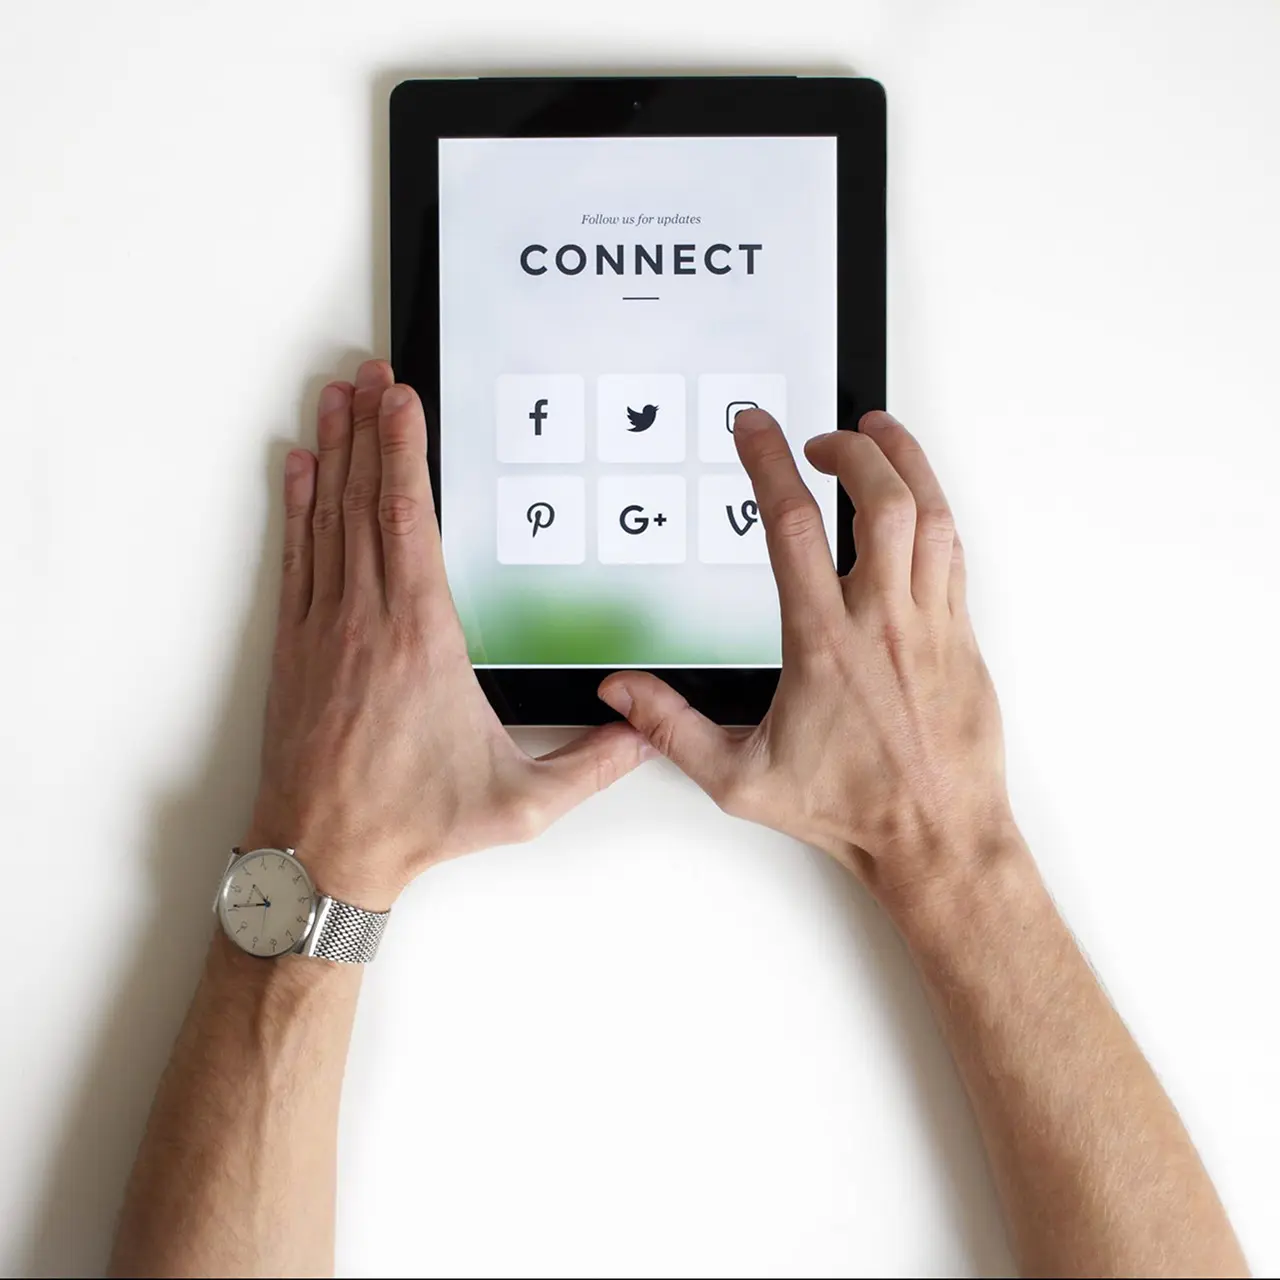 Two hands holding an iPad. The iPad says connect at the top of the screen and has icons to login online to Facebook, Twitter, Intagram, Pinterest, Google and Vine. One of the fingers is reaching to tap on Instagram.